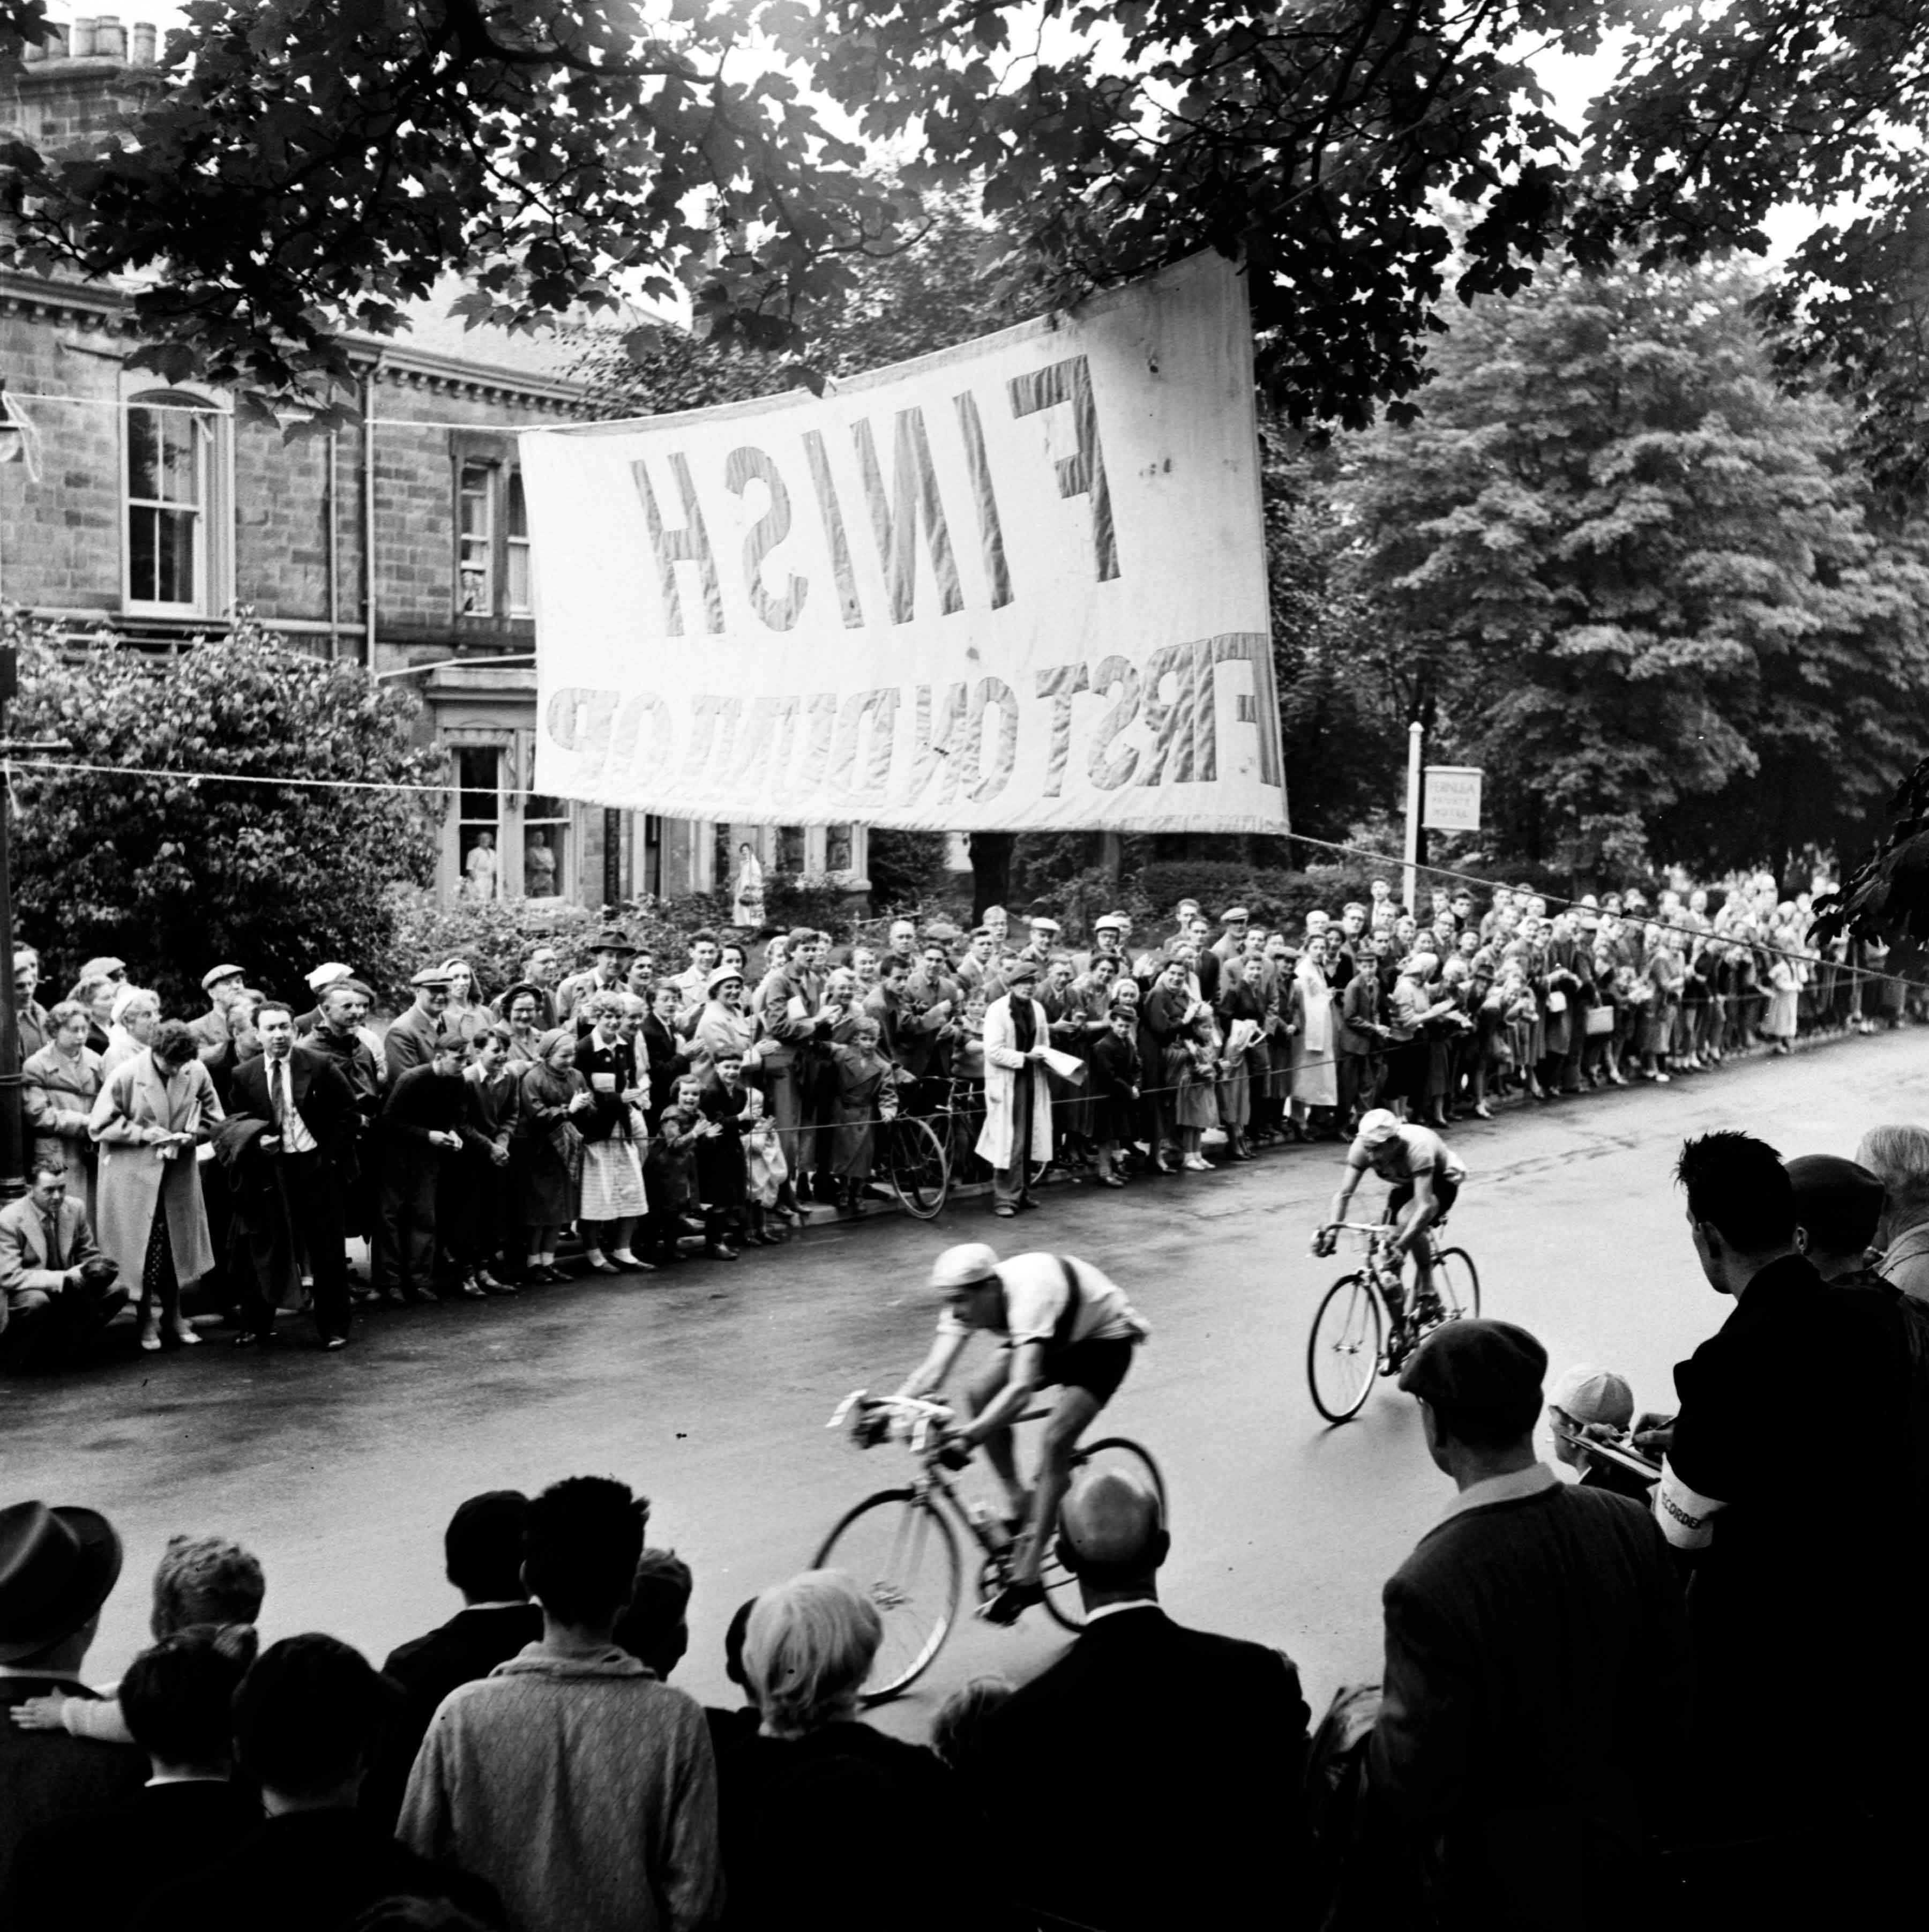 A cycling race during French Week in Harrogate in 1957, and Mr. J.J. Perks, the  winner of the Harrogate French Week cycle race in 1958. From the Bertram Unné photographic collection.